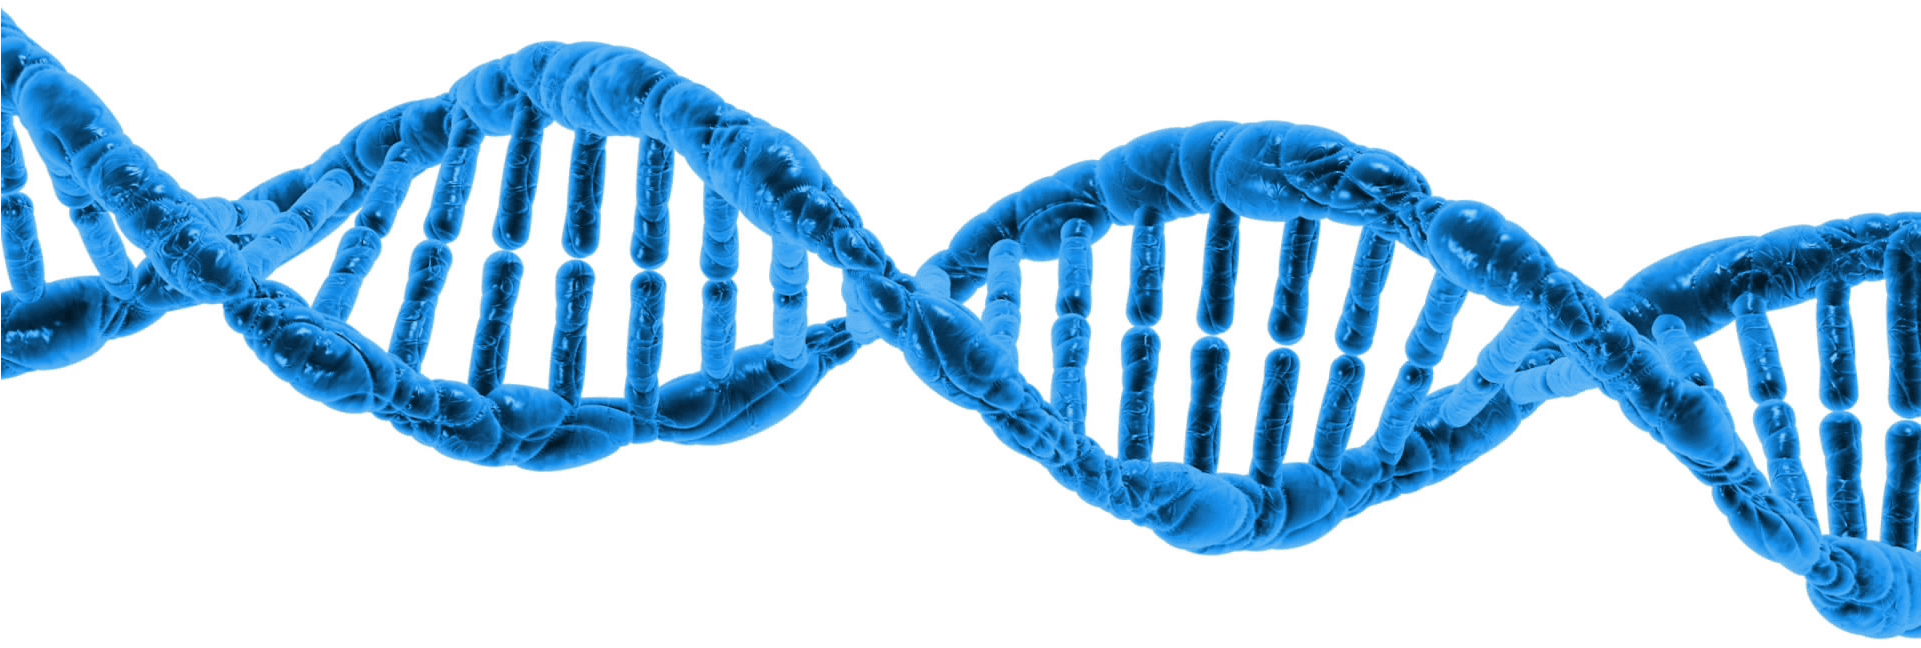 Dna String Double Helix - Missing Link: What It Means (1920x1080)